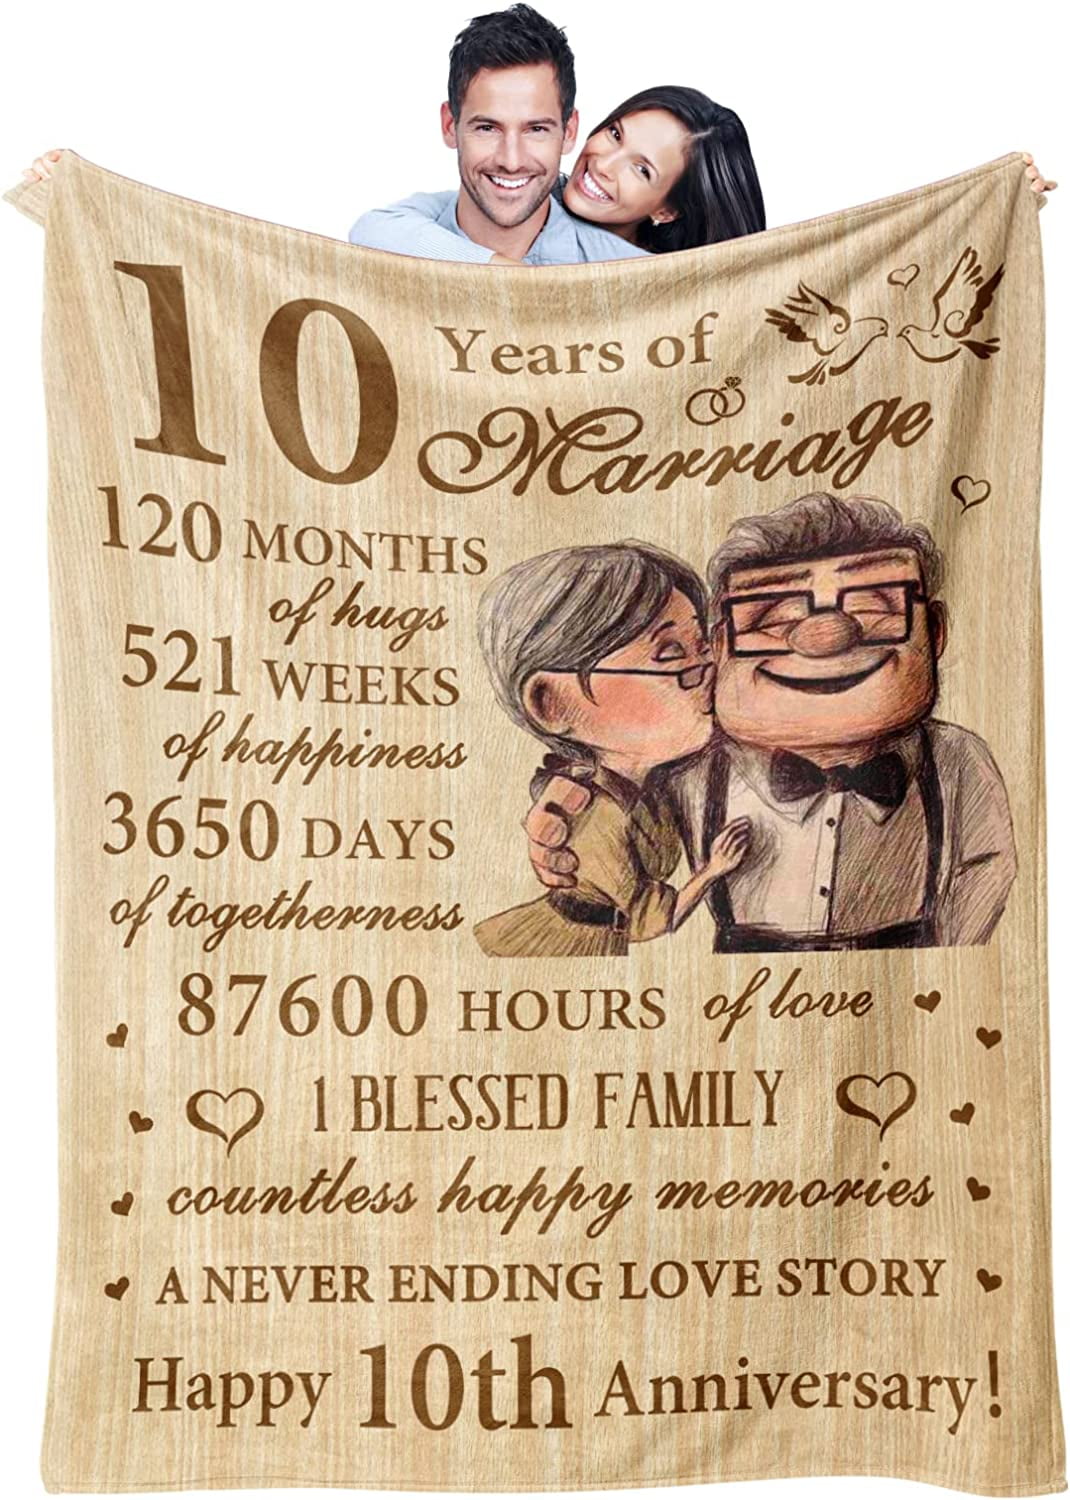 15th Anniversary Blanket Gifts,15th Anniversary Wedding Gift,15 Year  Anniversary for Him Her Gifts, 15th Anniversary Crystal Gifts for Men Wife  Husband, Gifts for 15 Years of Marriage Blanket 50X60 